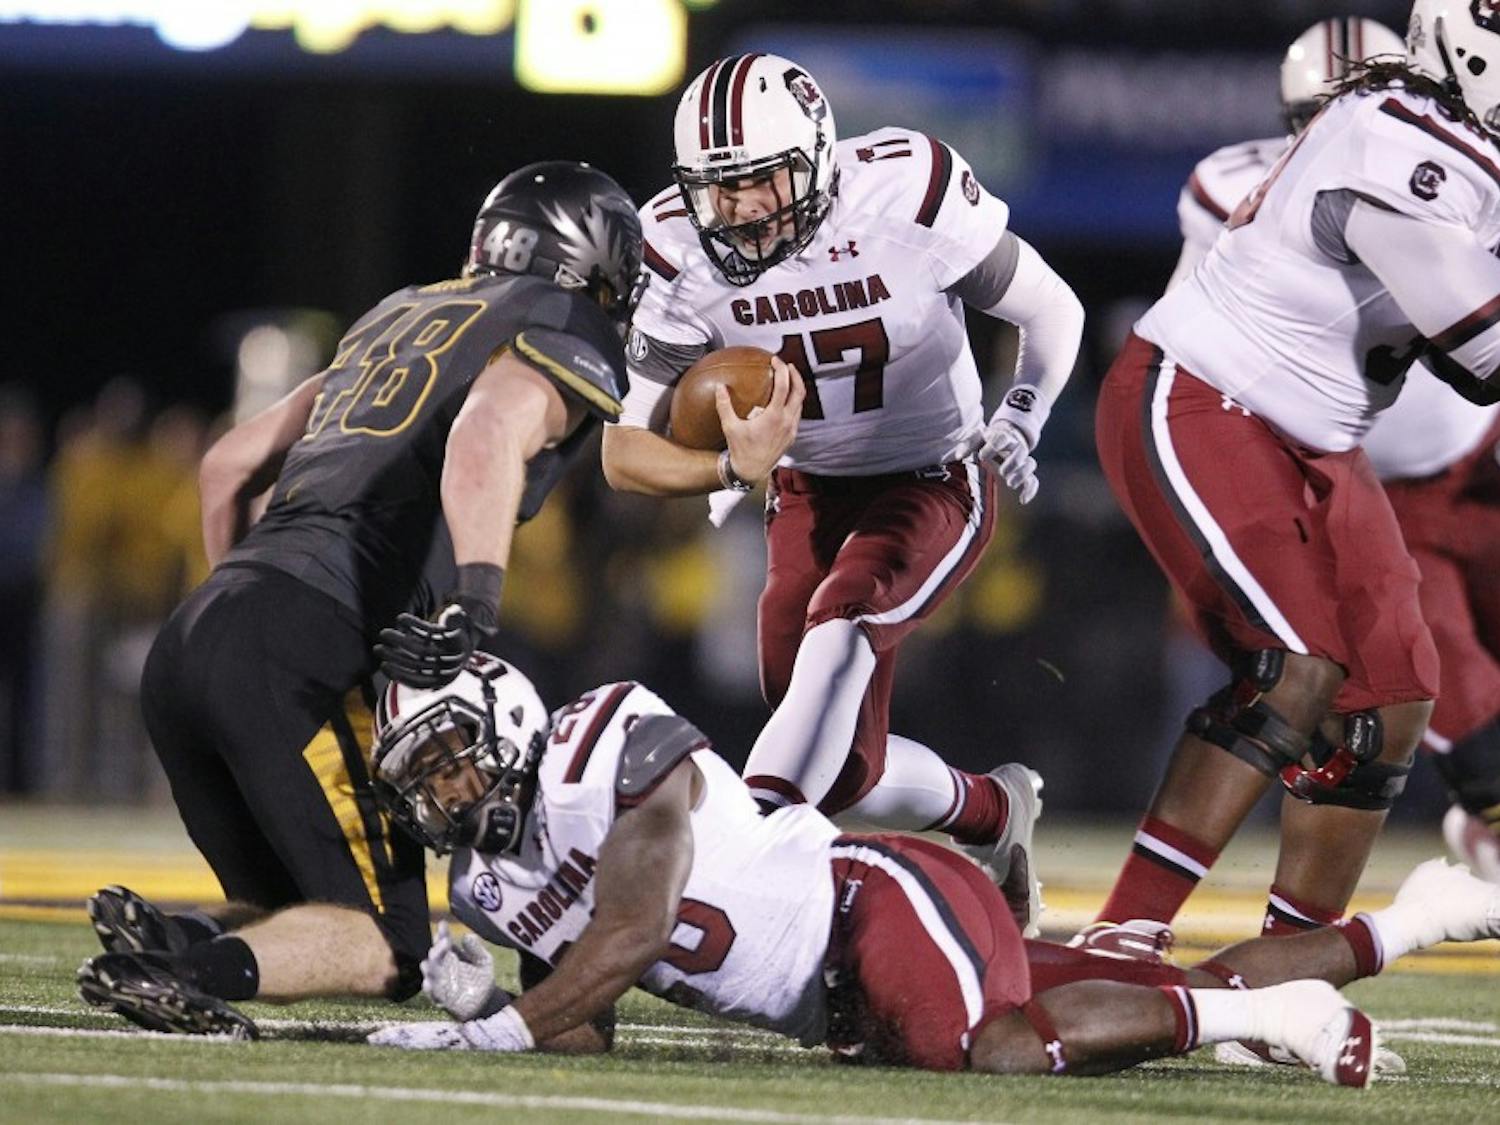 South Carolina Gamecocks quarterback Dylan Thompson (17) runs for a first down during the first quarter against Missouri at Memorial Stadium's Faurot Field in Columbia, Missouri, on Saturday, October 26, 2013. (Gerry Melendez/The State/MCT)